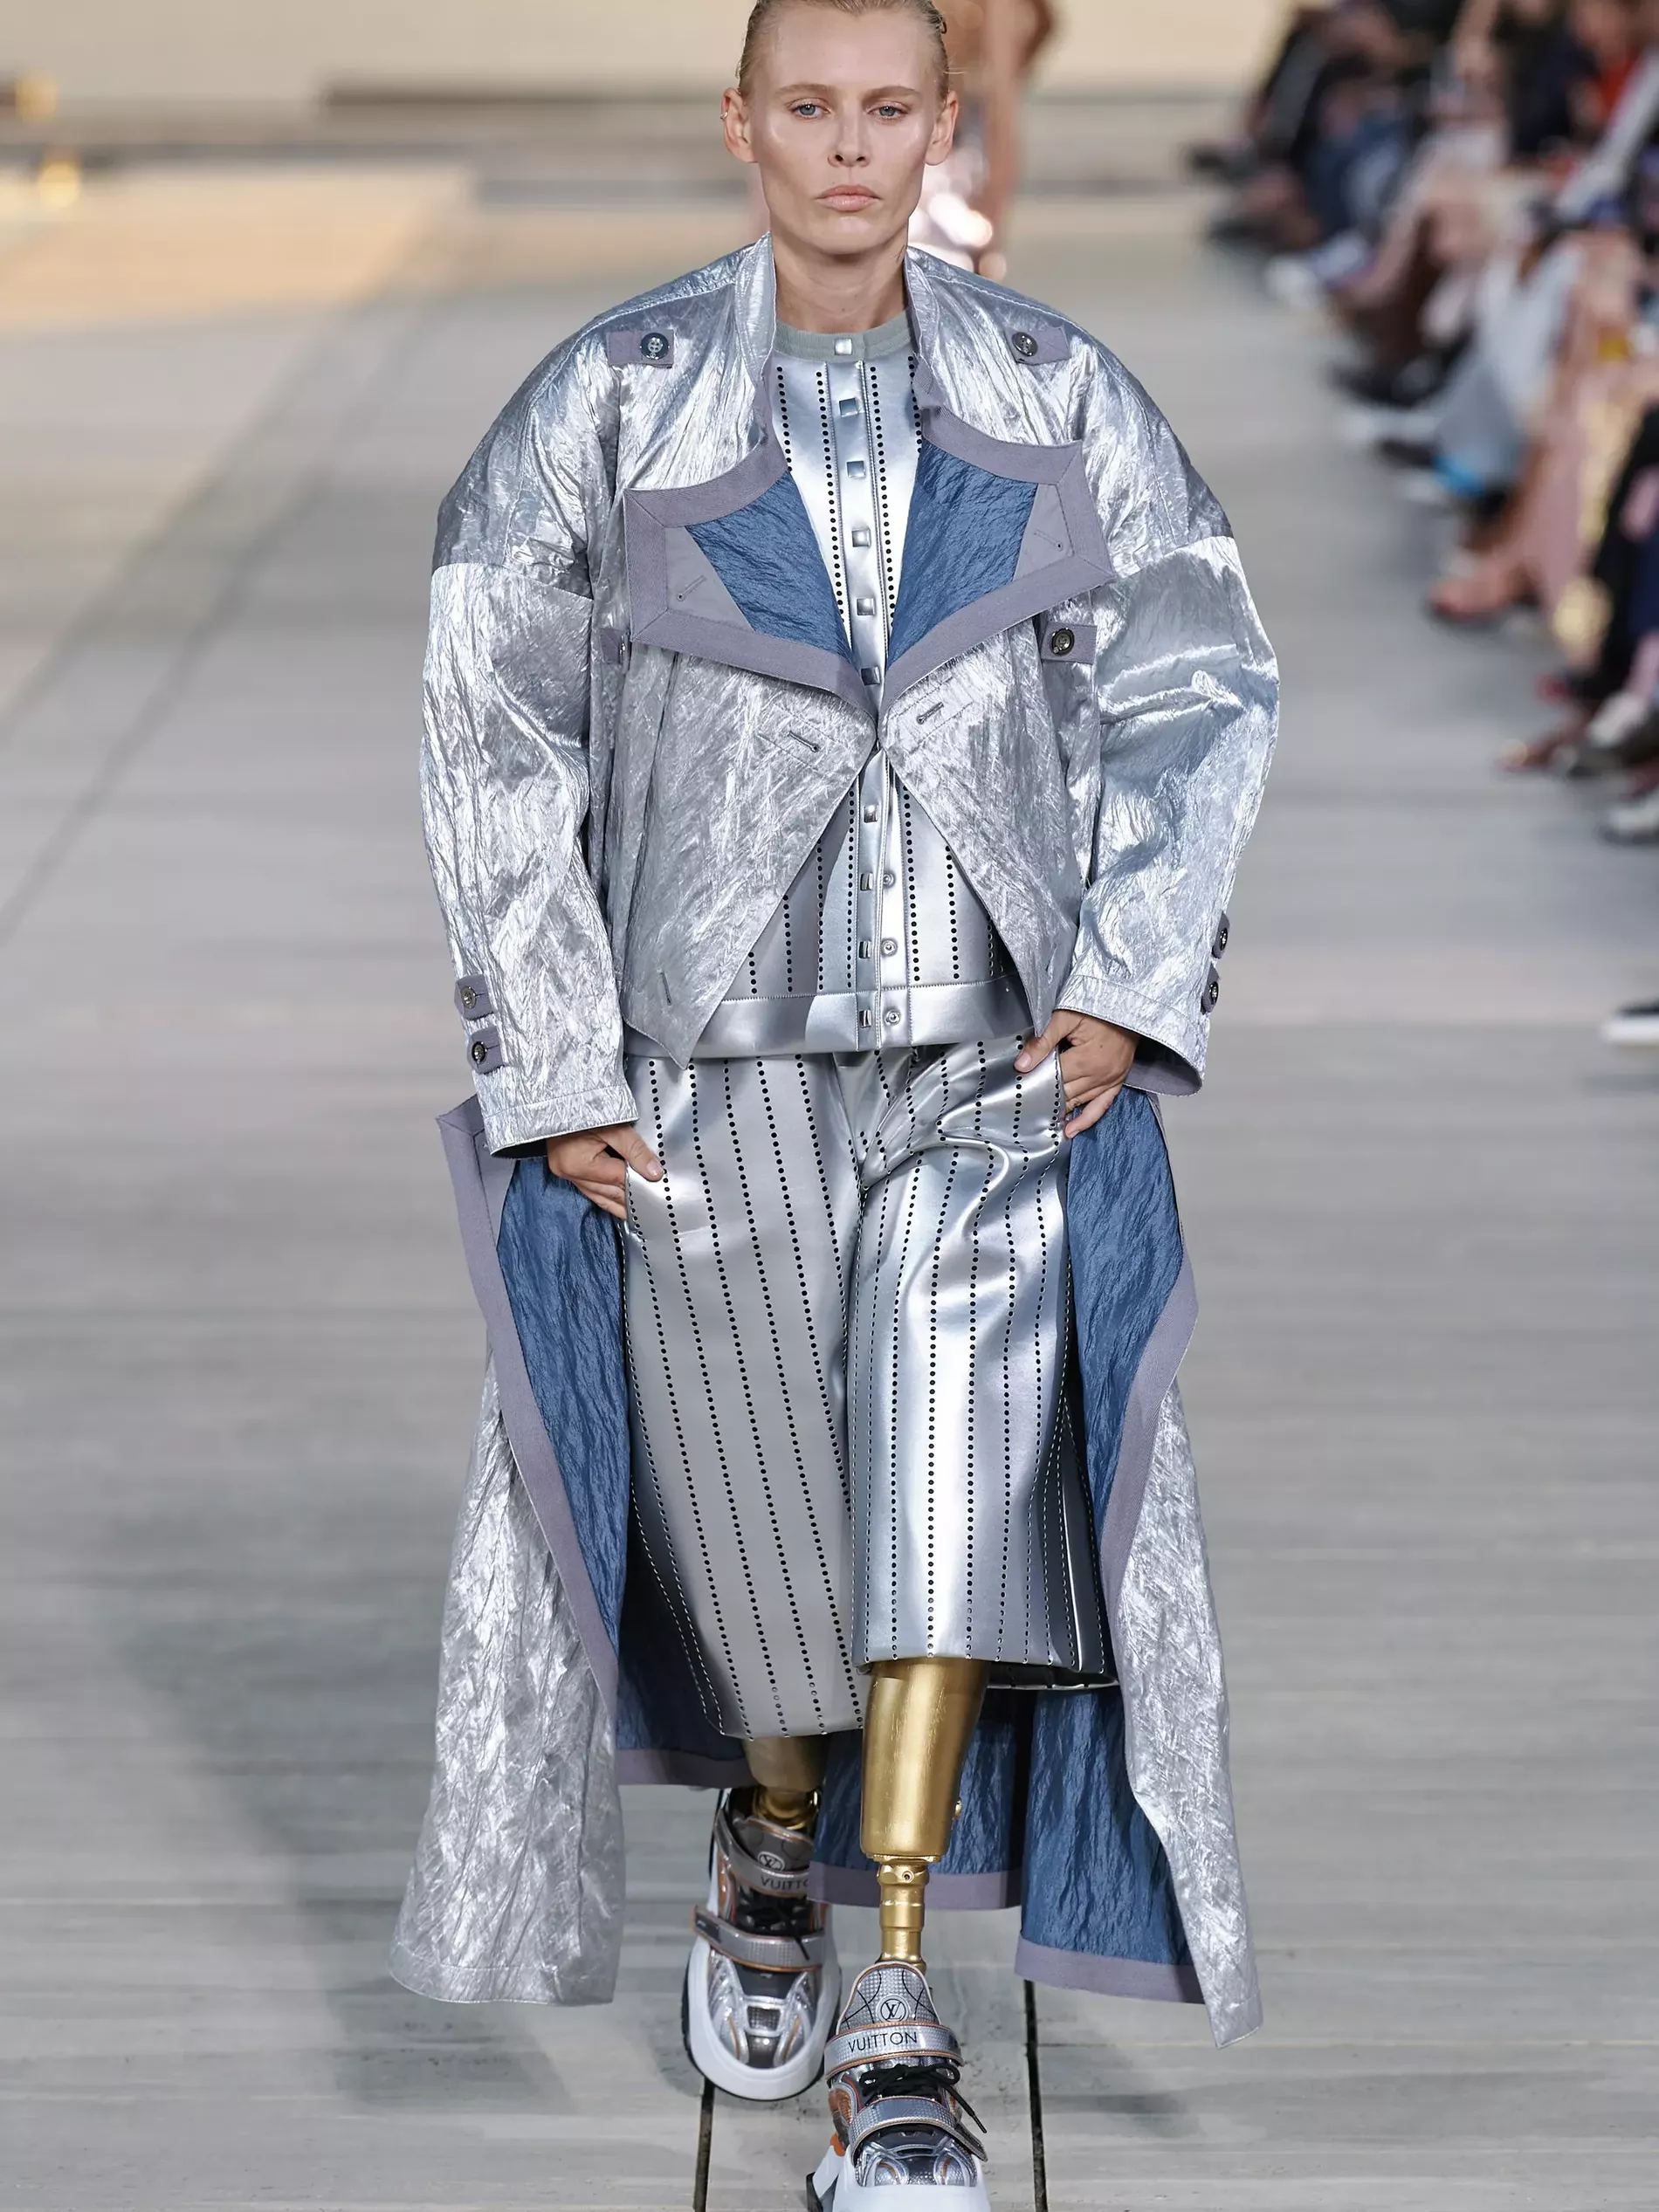 Louis Vuitton Cruise 2023 Sails Into San Diego – The Laterals